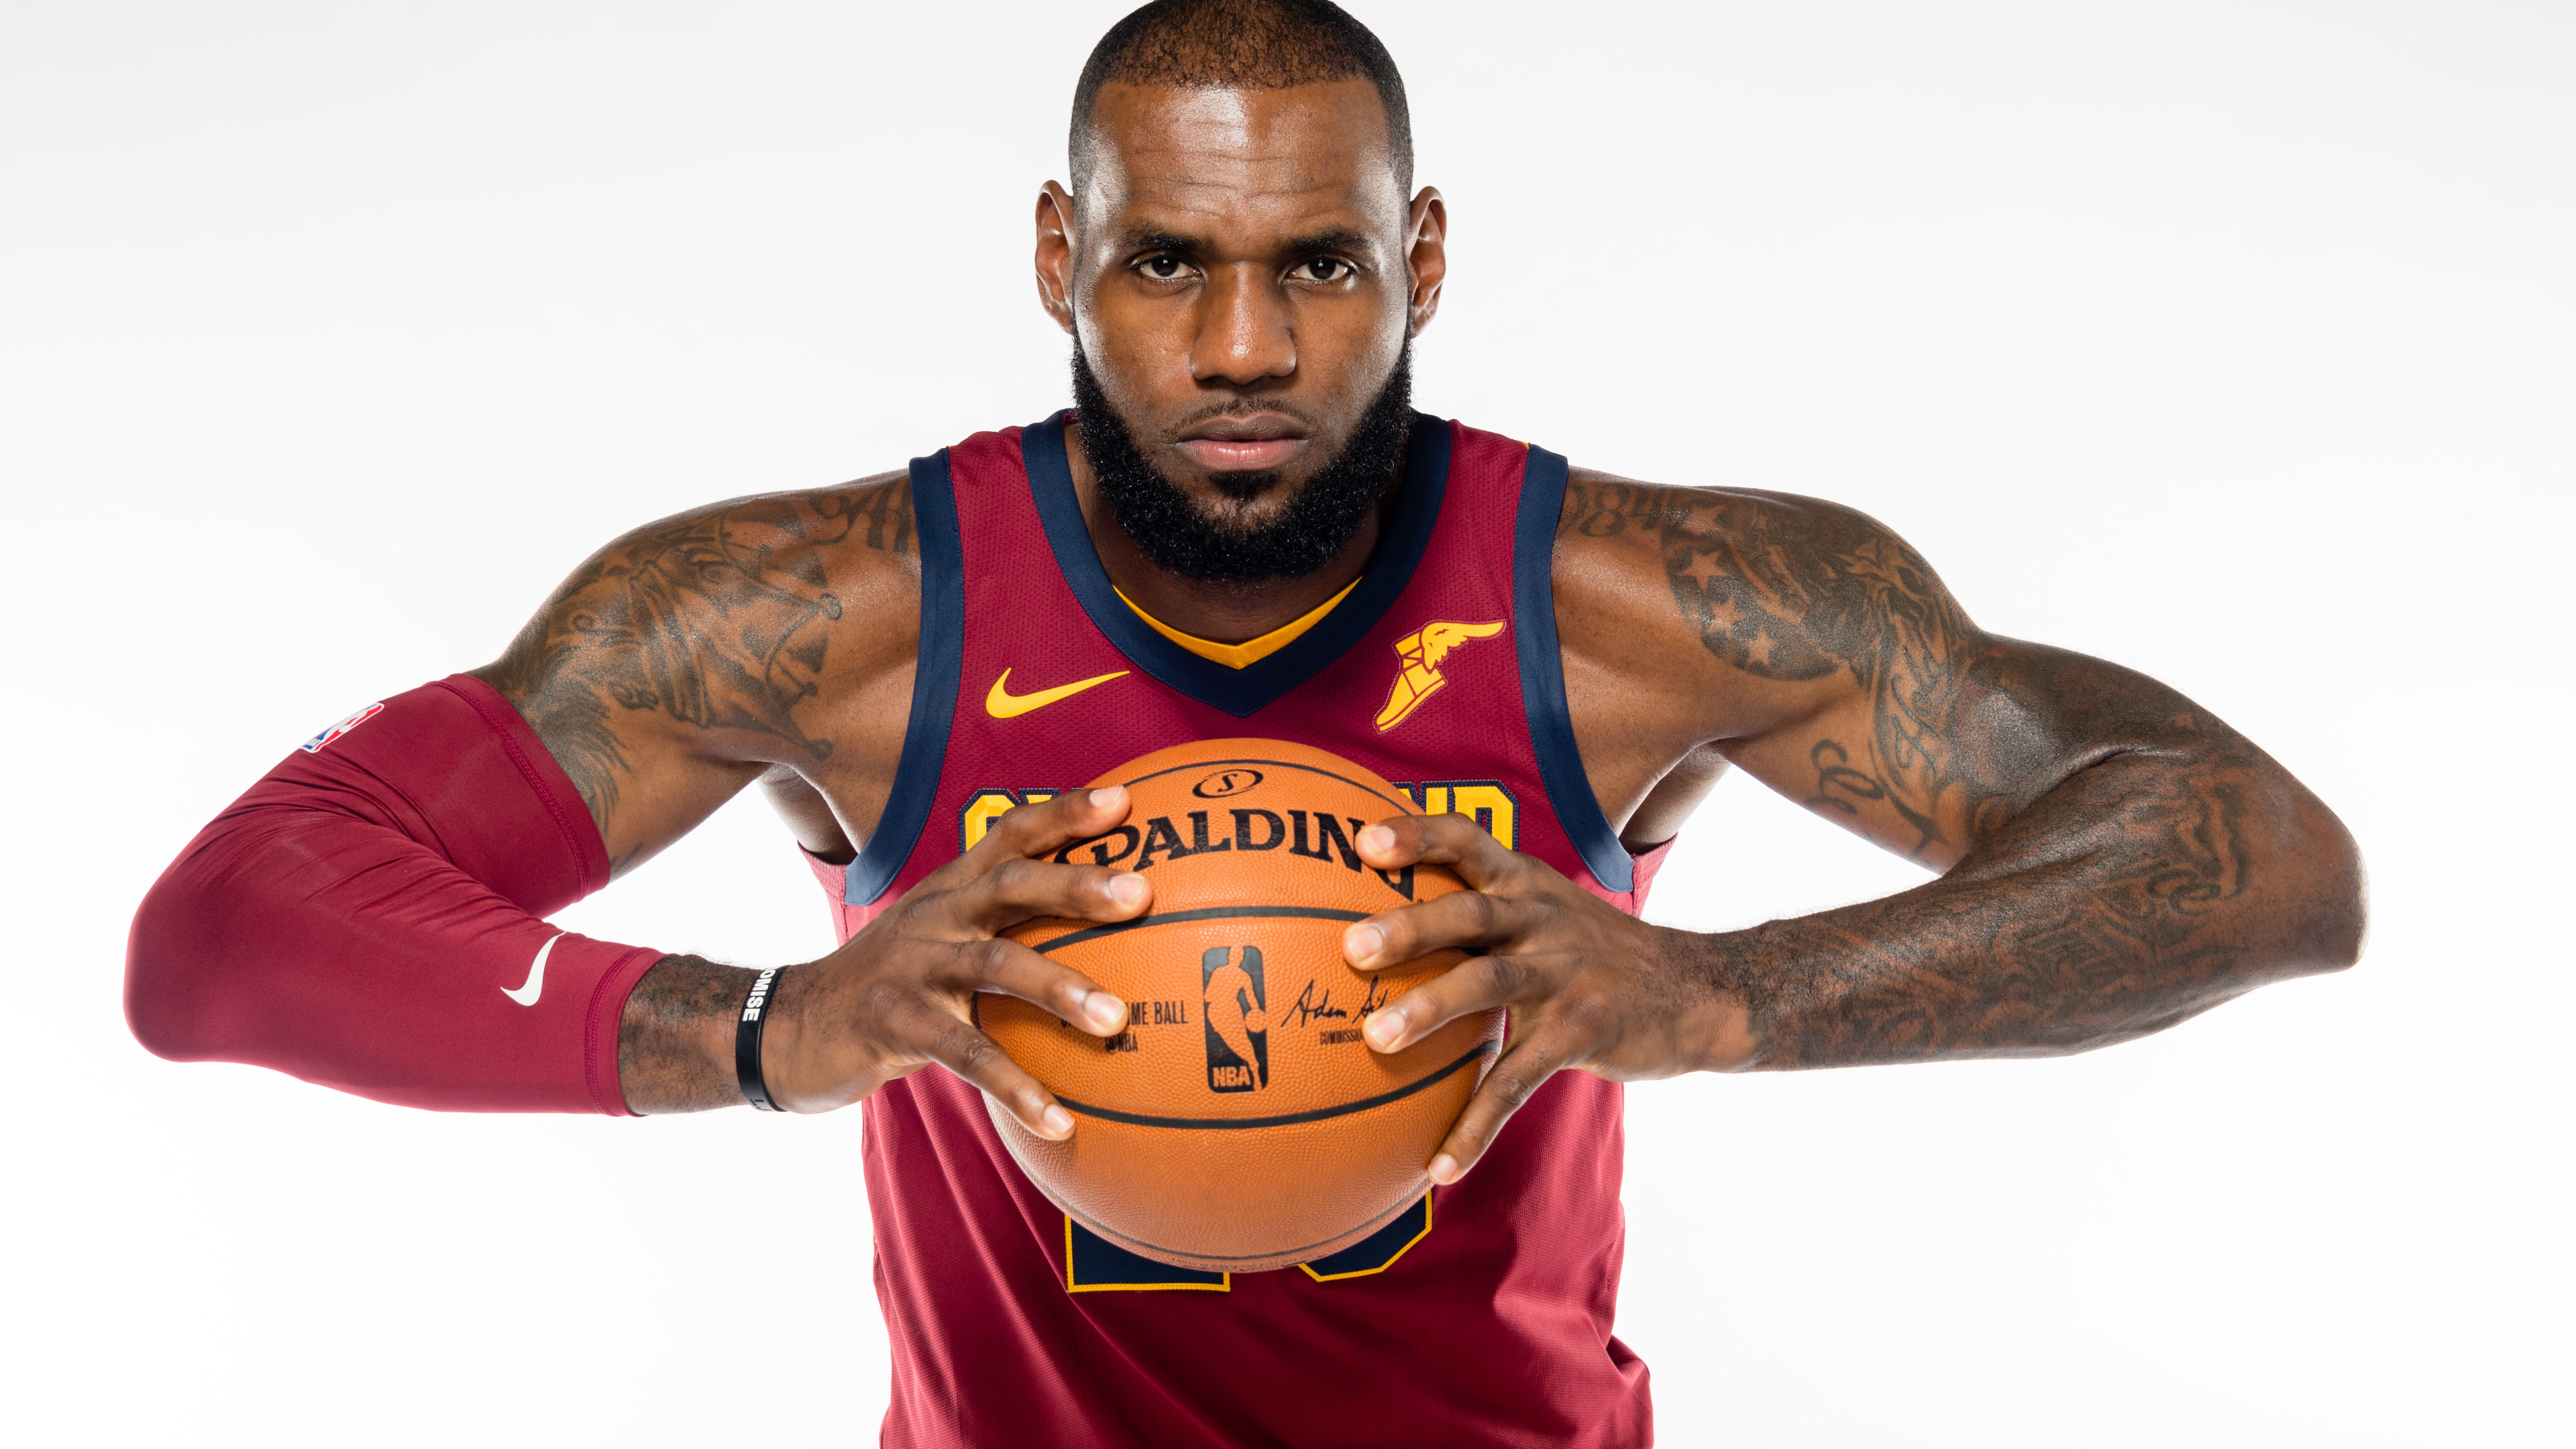 HoopsWallpaperscom  Get the latest HD and mobile NBA wallpapers today LeBron  James Archives  HoopsWallpaperscom  Get the latest HD and mobile NBA  wallpapers today